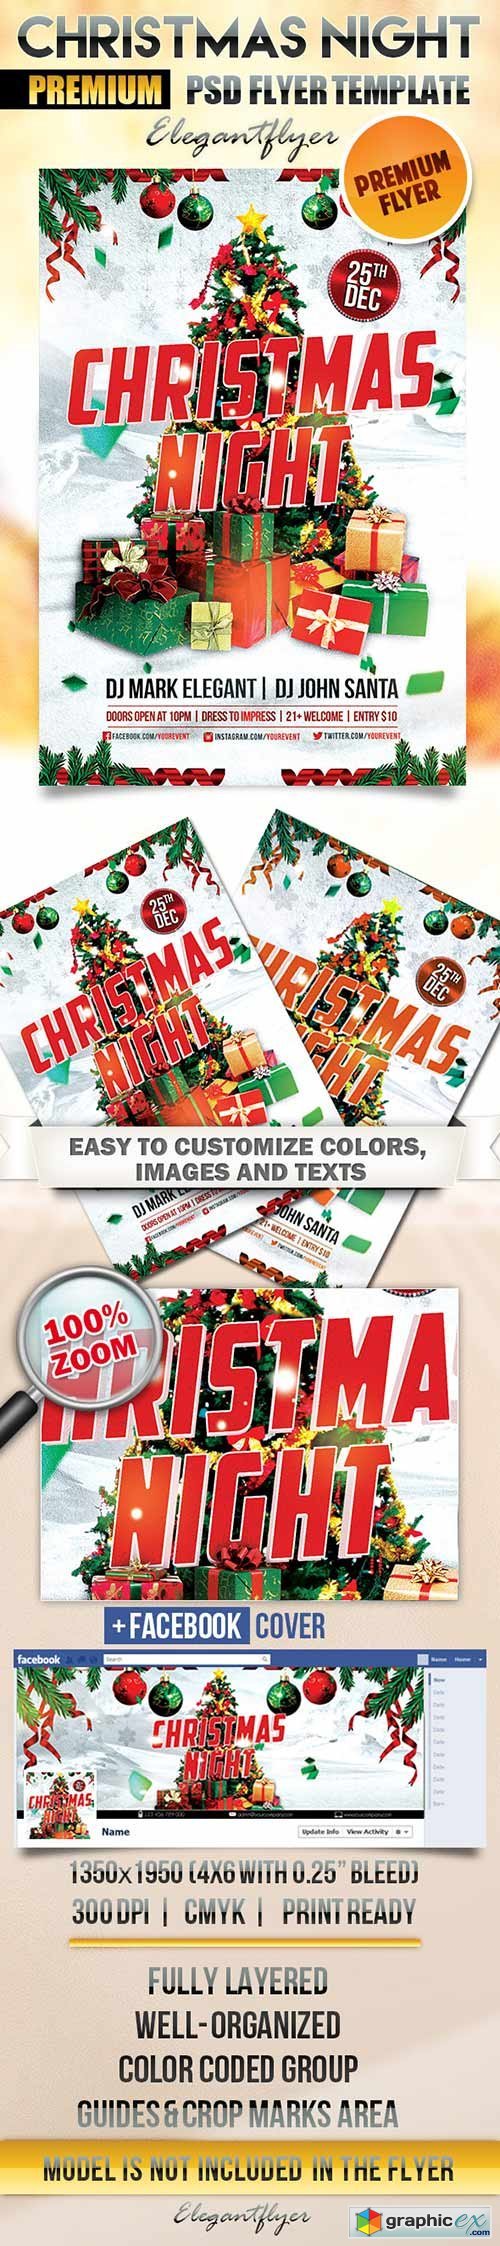 Christmas Night Flyer PSD Template + Facebook Cover